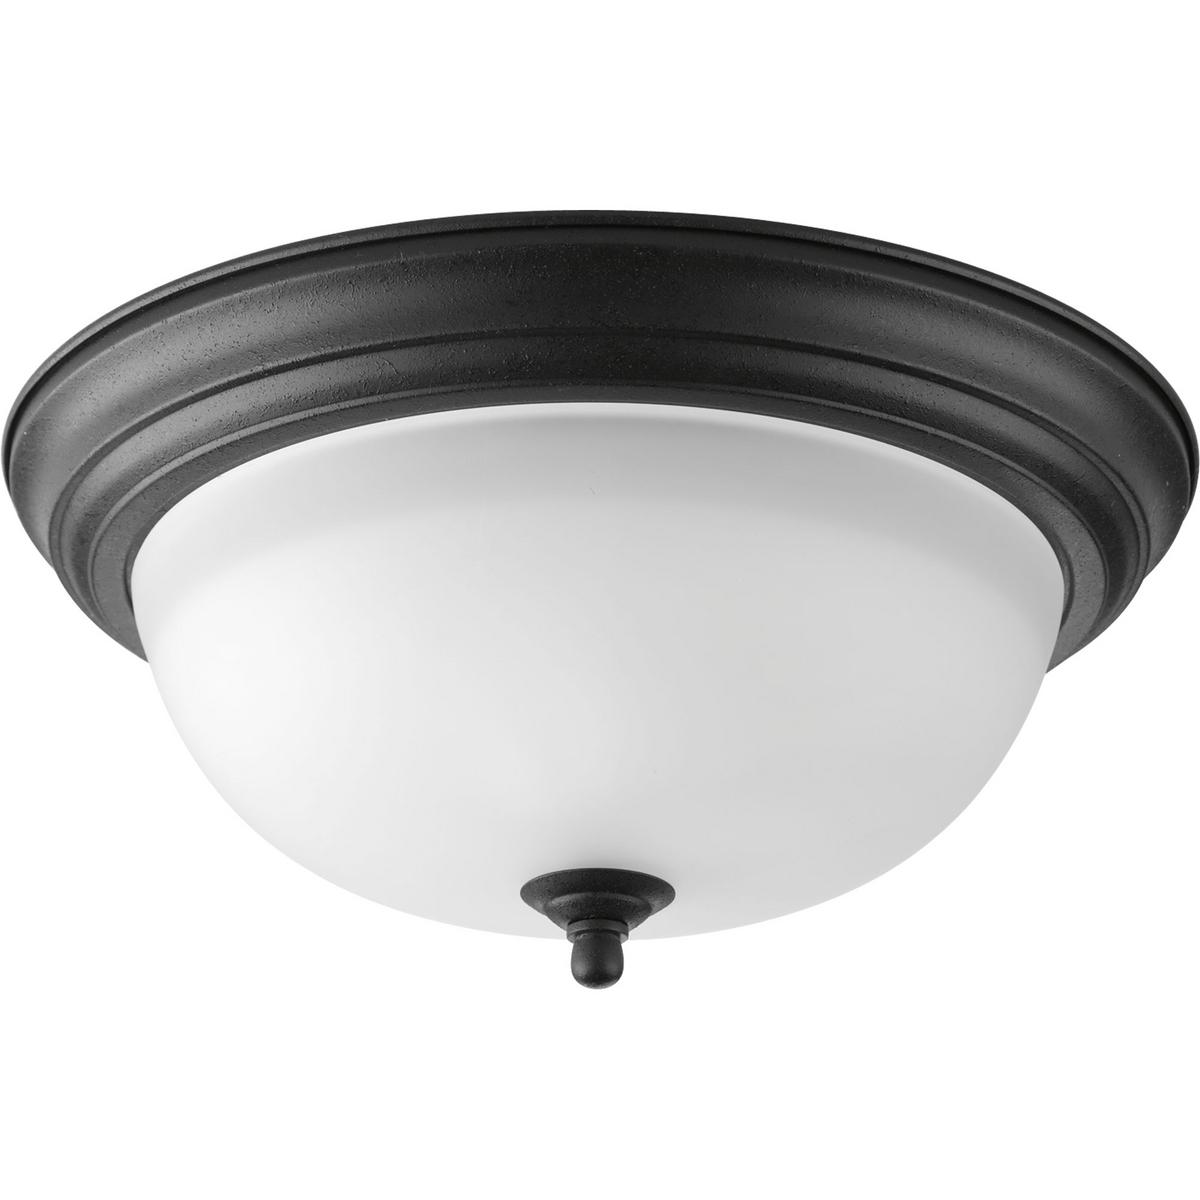 Hubbell P3925-80 Two-light flush mount with dome shaped alabaster glass, solid trim and decorative knobs. Center lock-up with matching finial. Forged Black finish.  ; Forged Black finish. ; Etched glass. ; Decorative details.